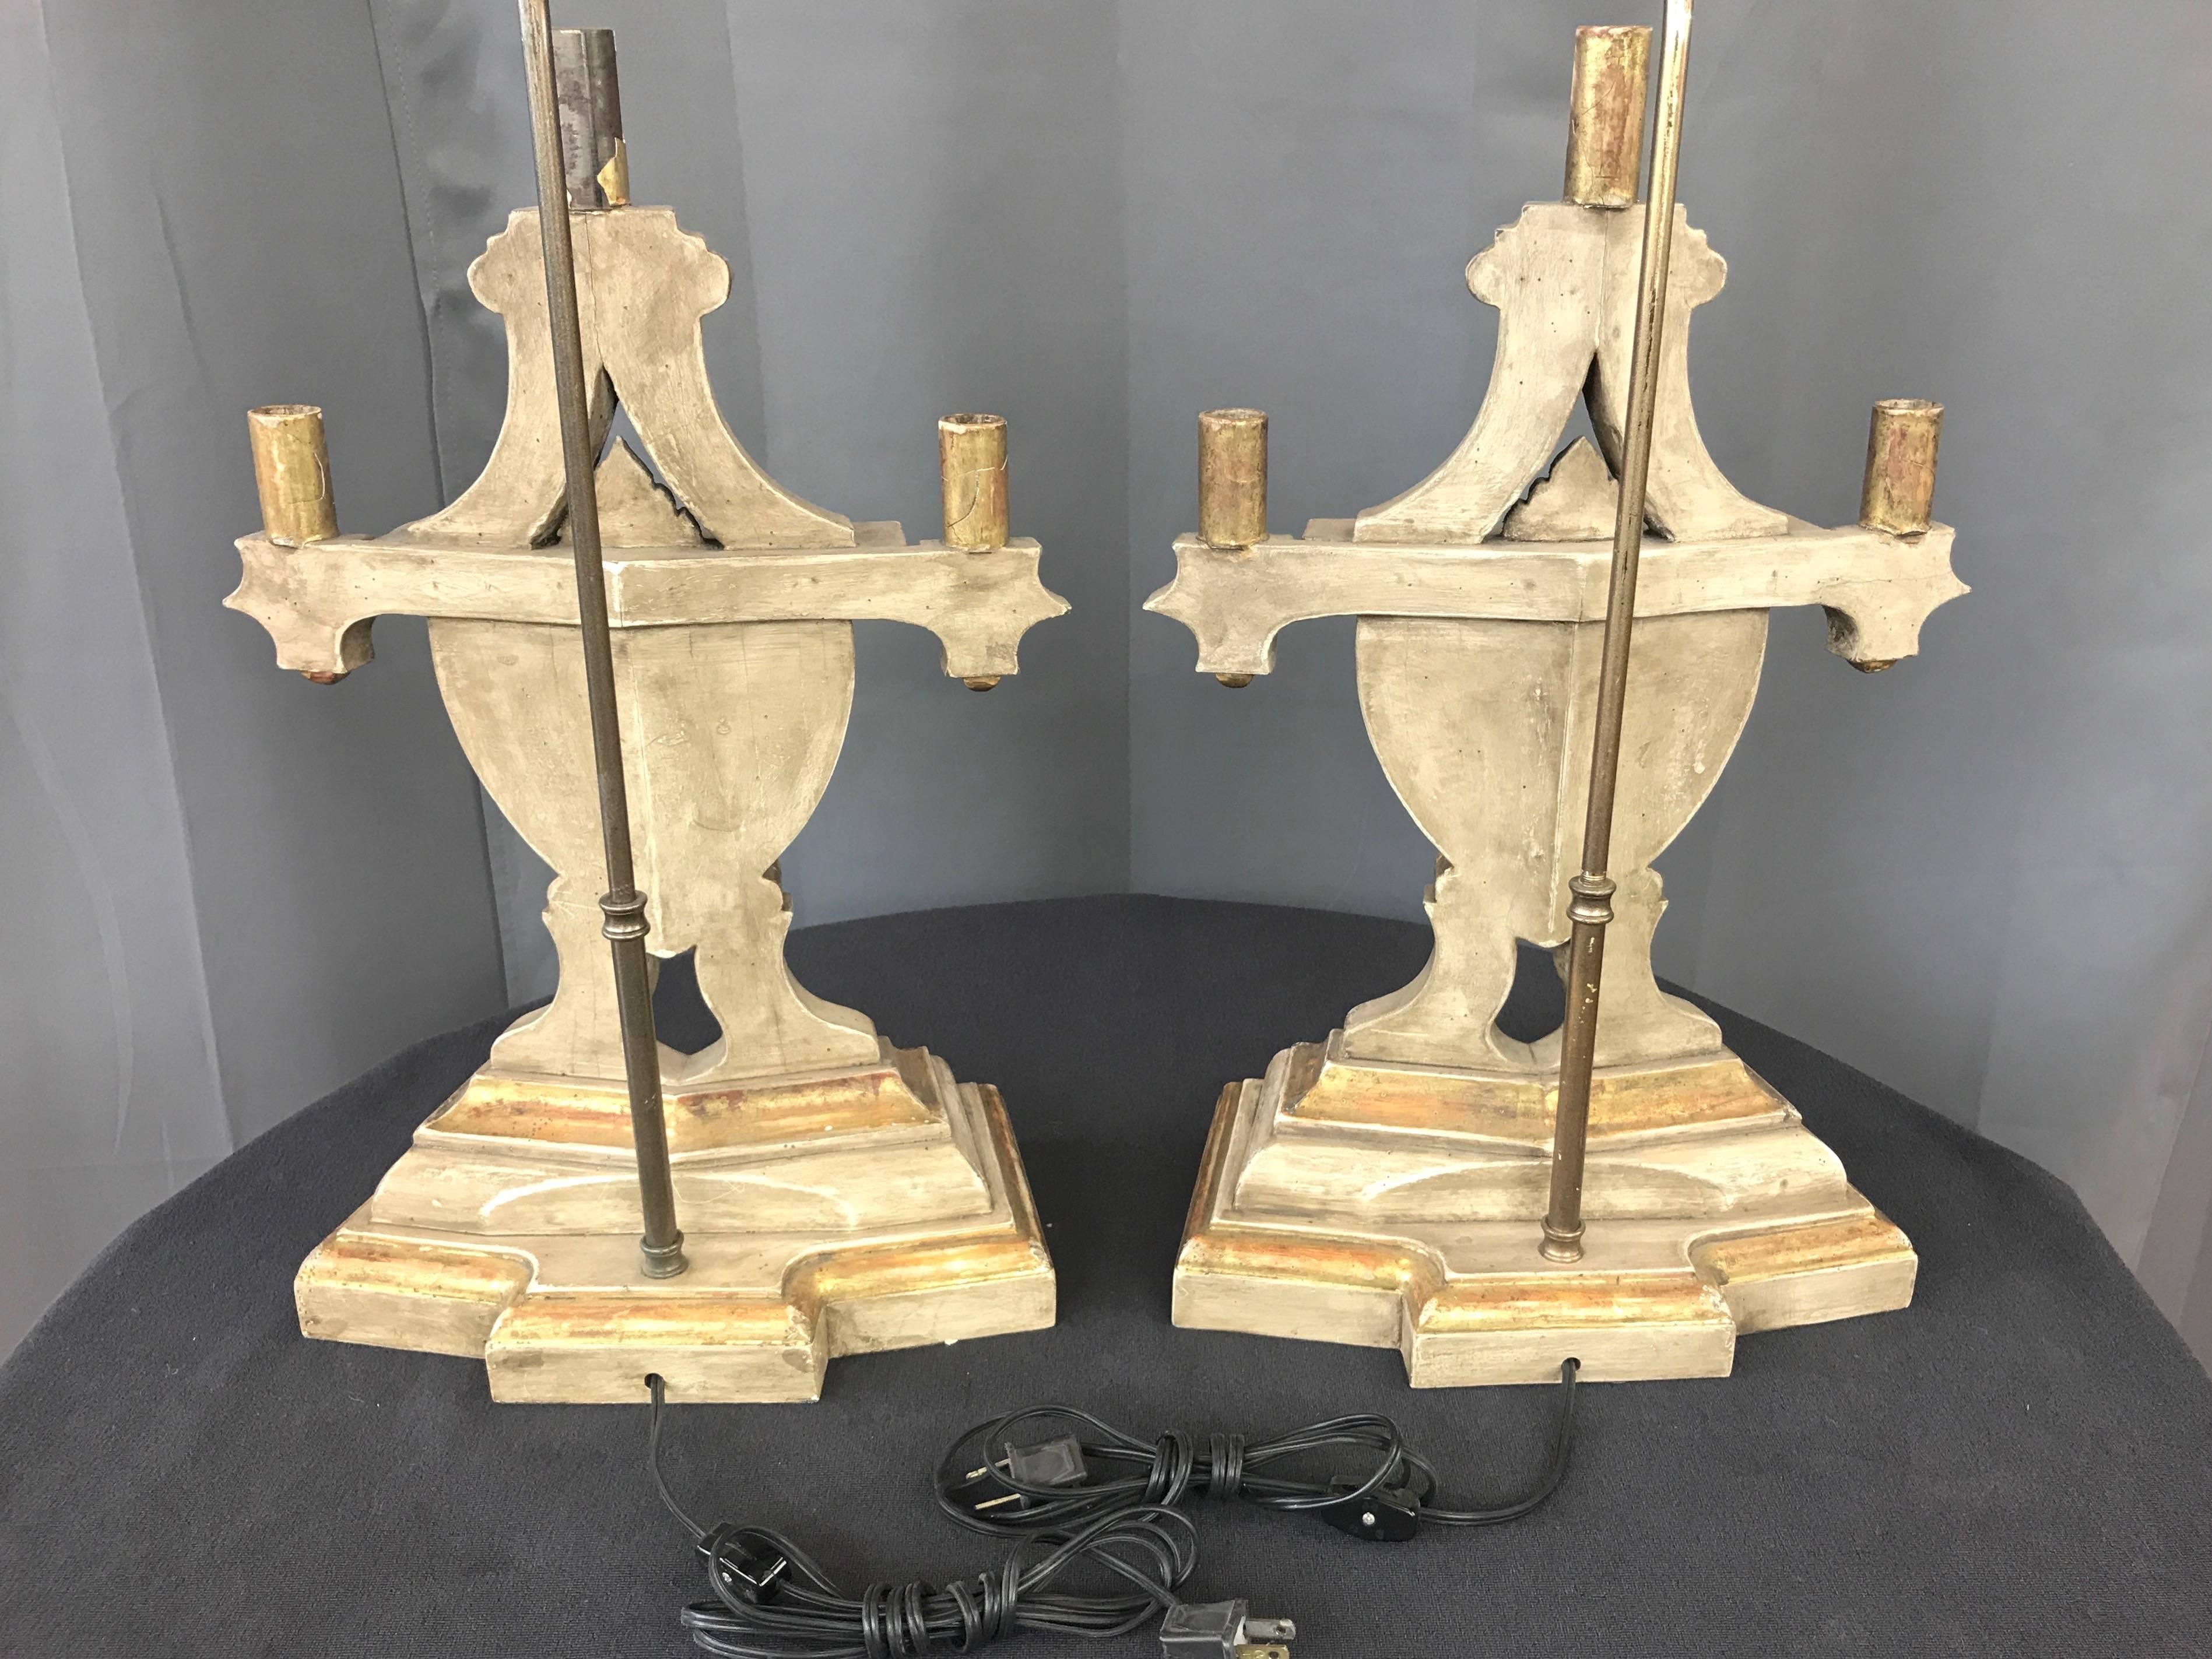 Pair of 1930s Italian Neoclassical Parcel-Gilt Candleholder Table Lamps For Sale 6